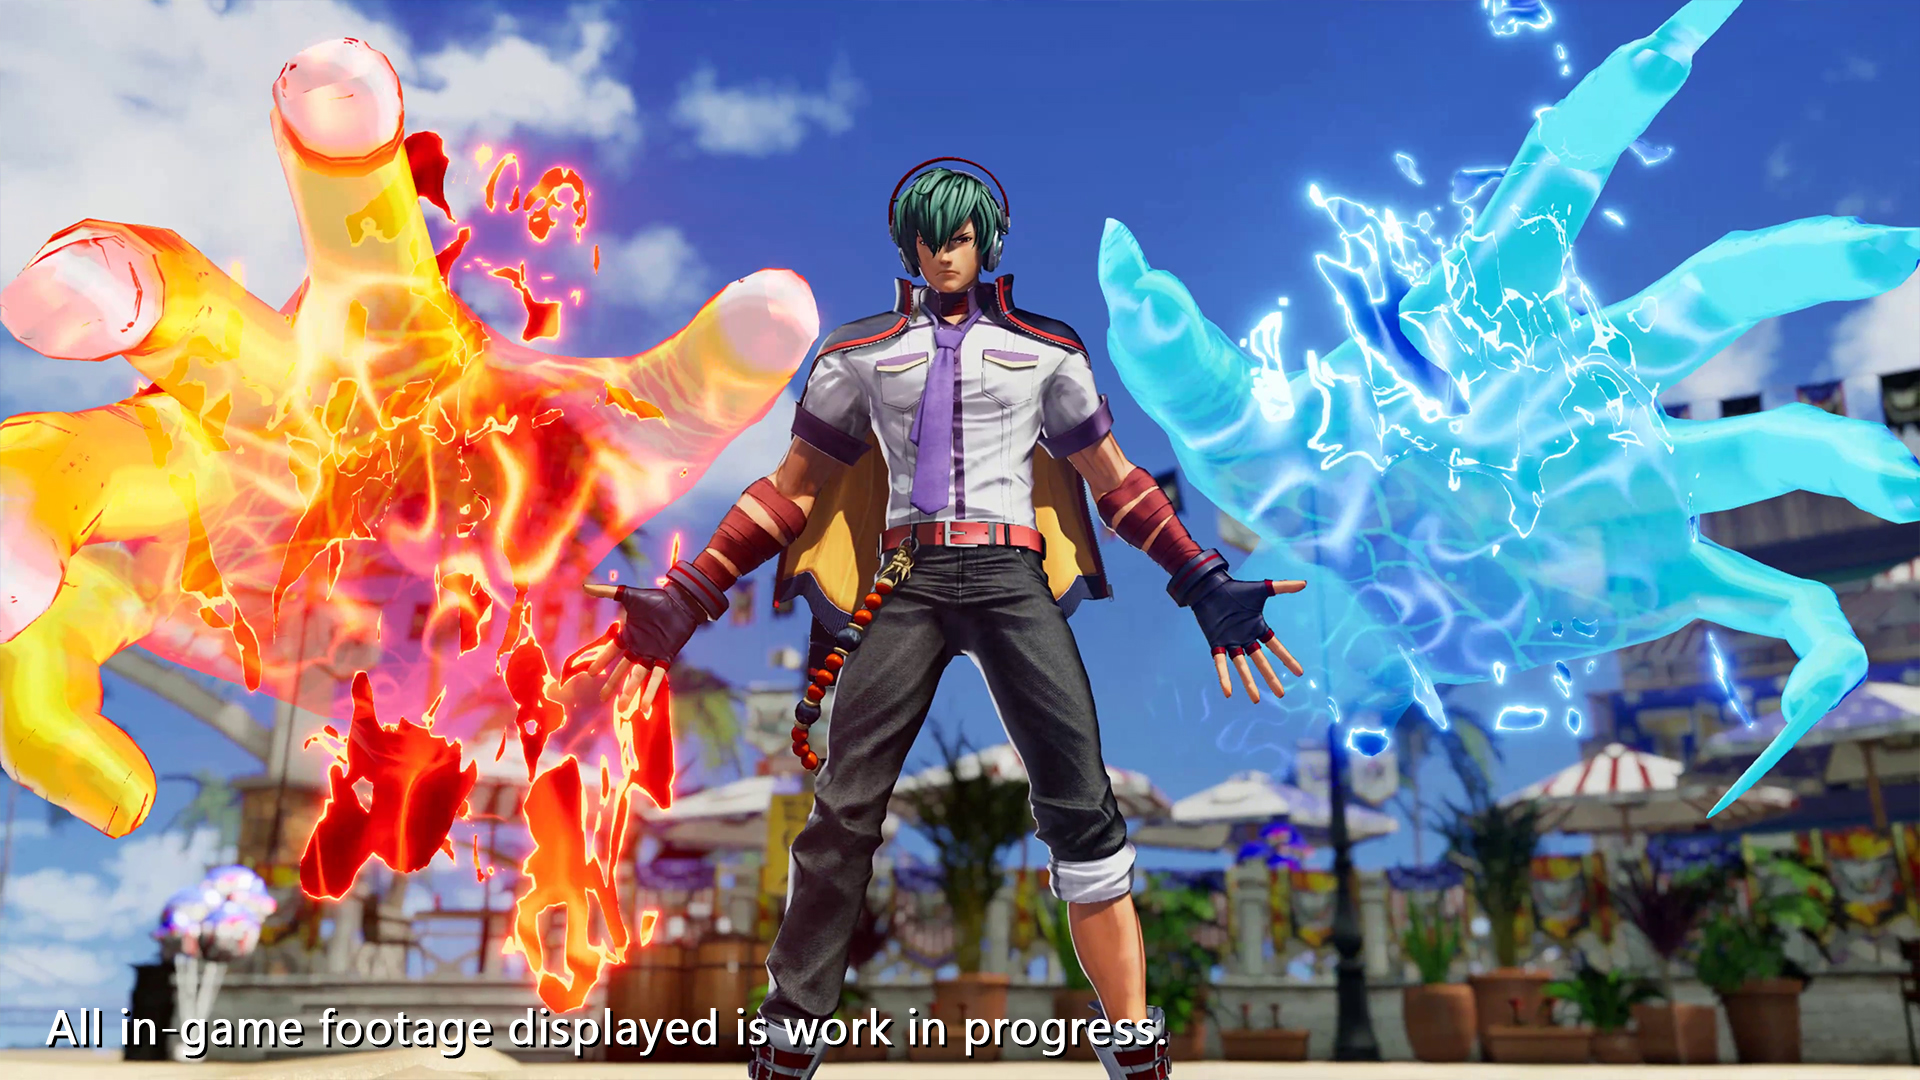 King of Fighters XV Adds Iori Yagami With Latest Character Trailer